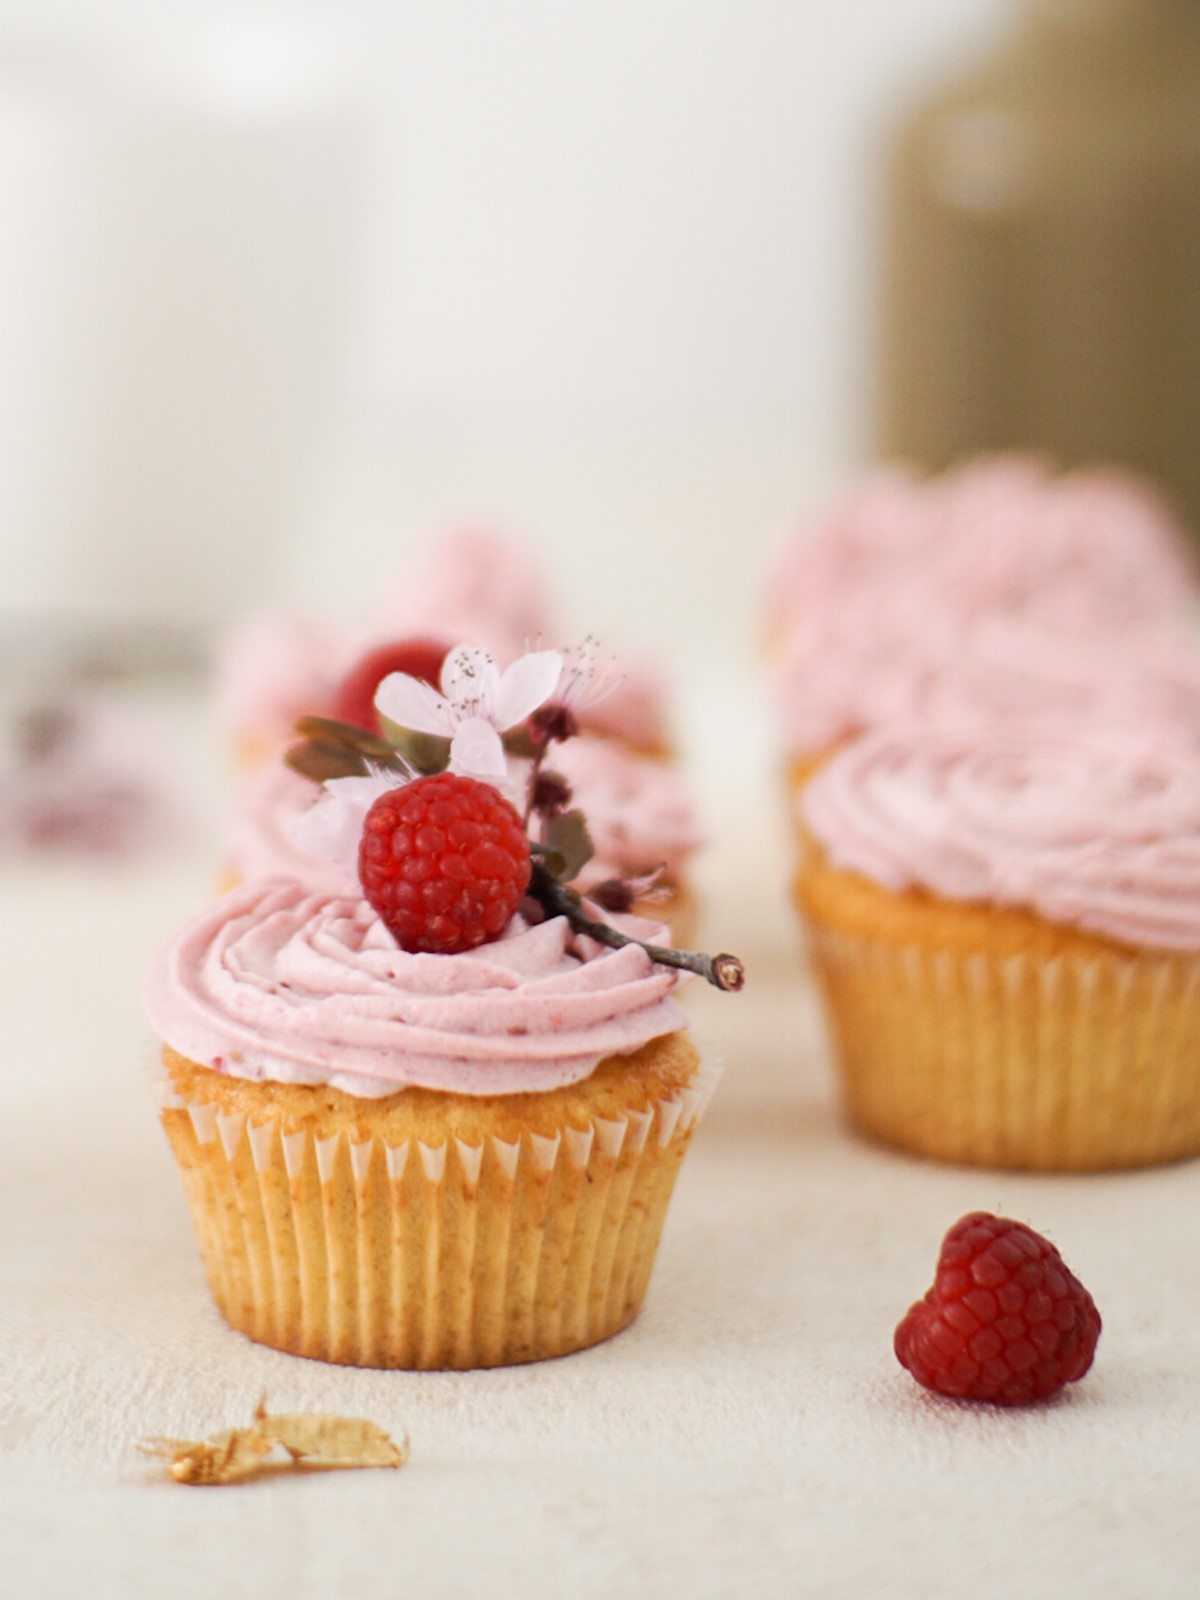 Delicious Raspberry Cupcakes - Title of the Recipe